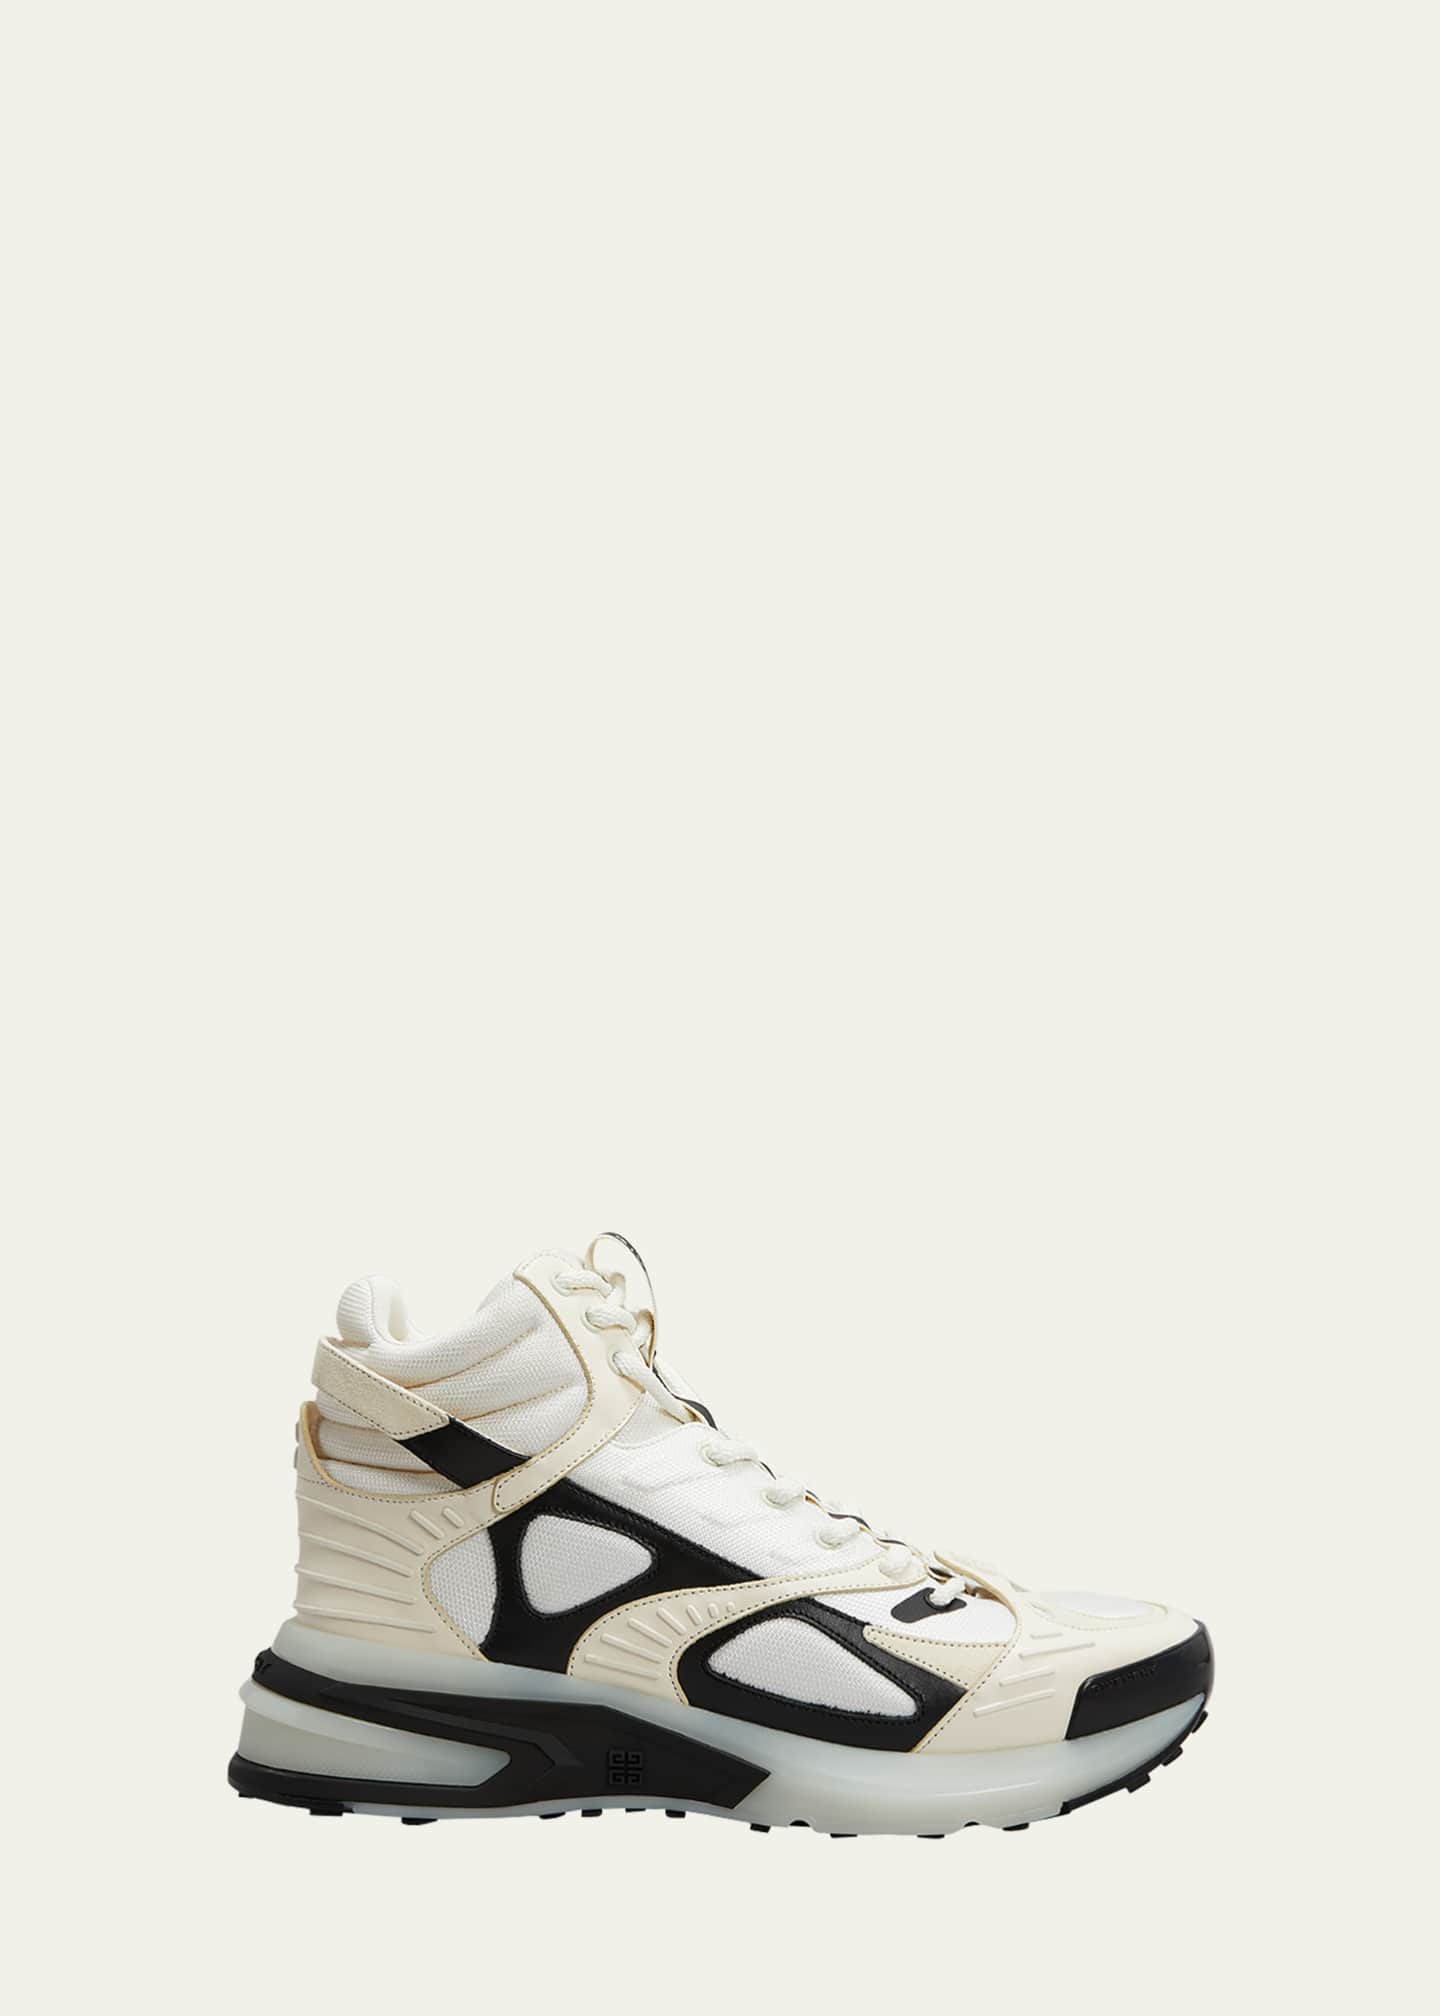 Givenchy Men's GIV 1 Clear-Sole Mesh High-Top Sneakers - Bergdorf Goodman